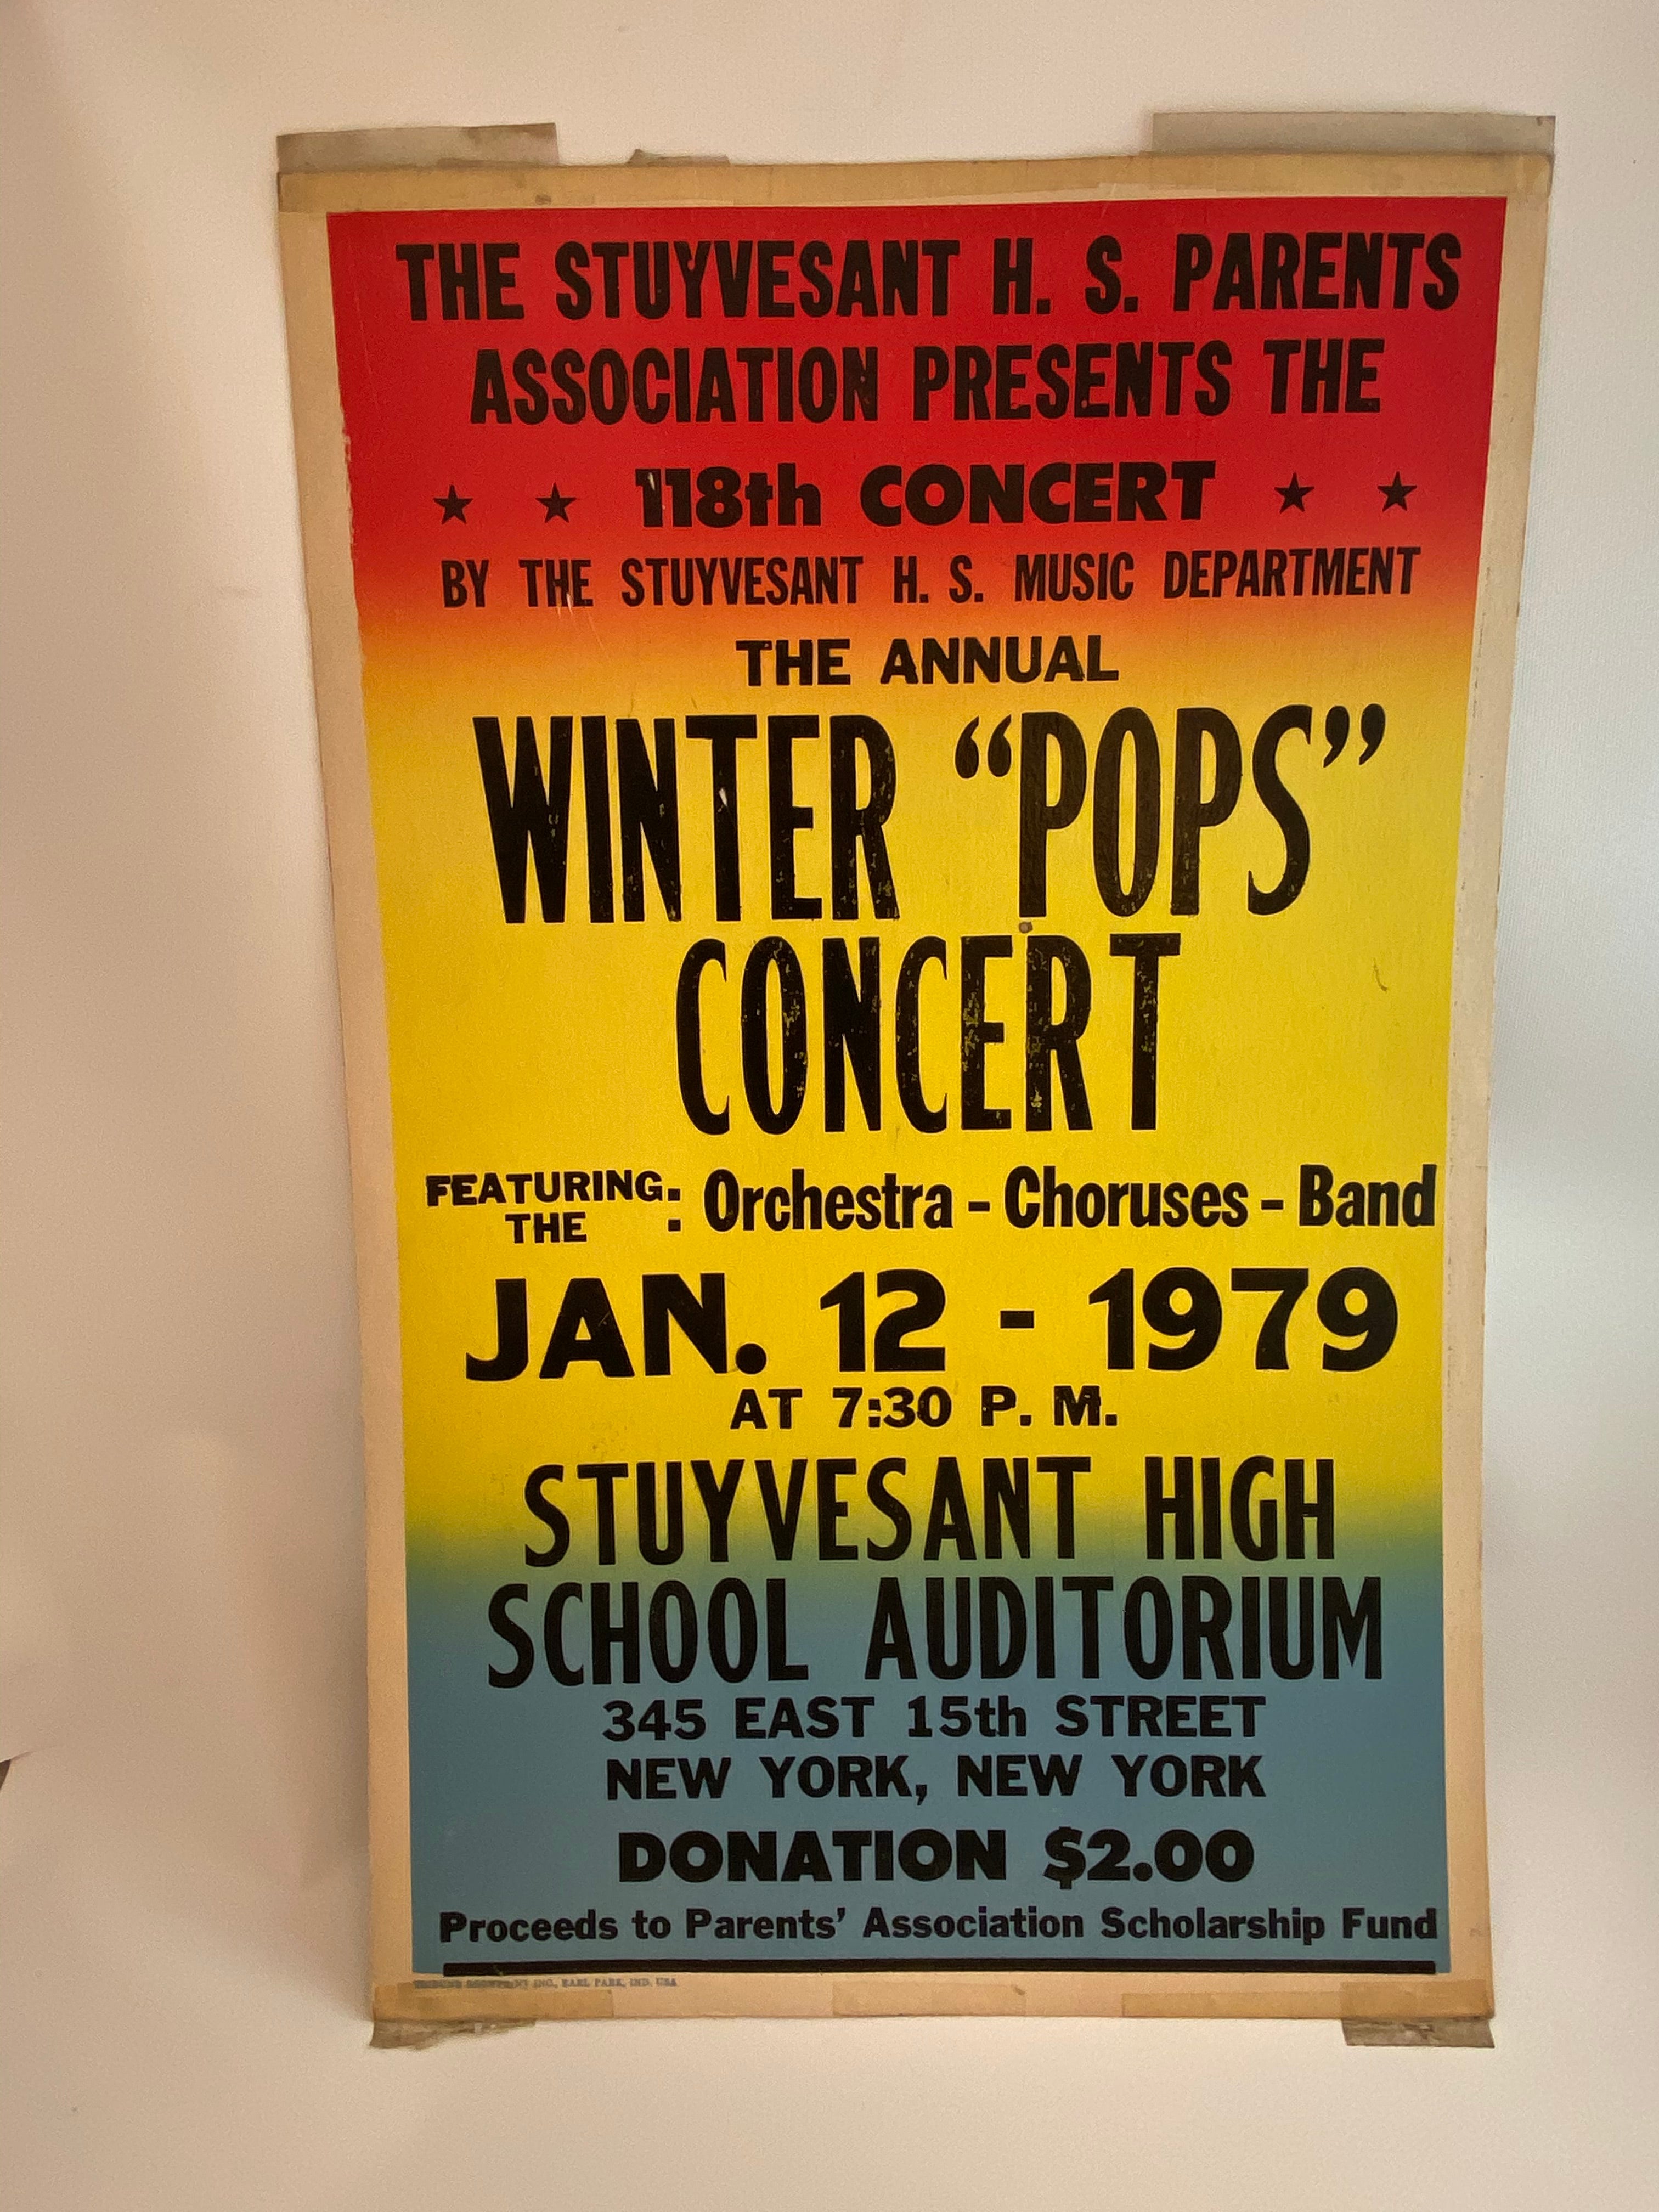 Stuyvesant High School concert poster. Bright rainbow background with black lettering. Circa 1979. Winter Pops Concert...Good overall condition with wear commensurate with age and use. Soft edges and corners, tape and tape residue fading, but no